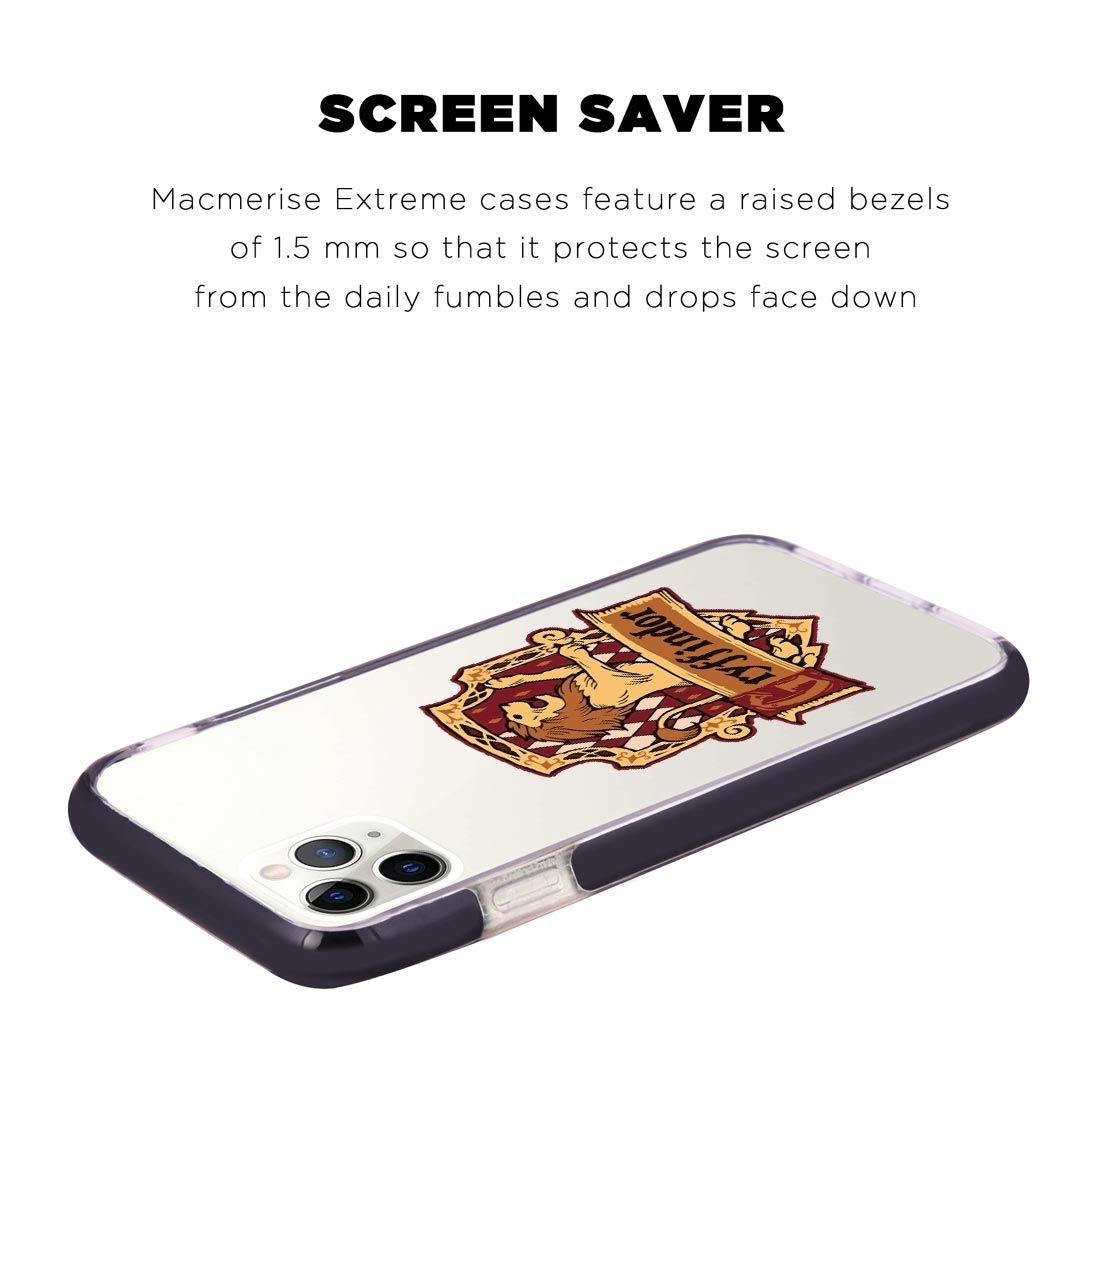 Crest Gryffindor - Extreme Phone Case for iPhone 11 Pro